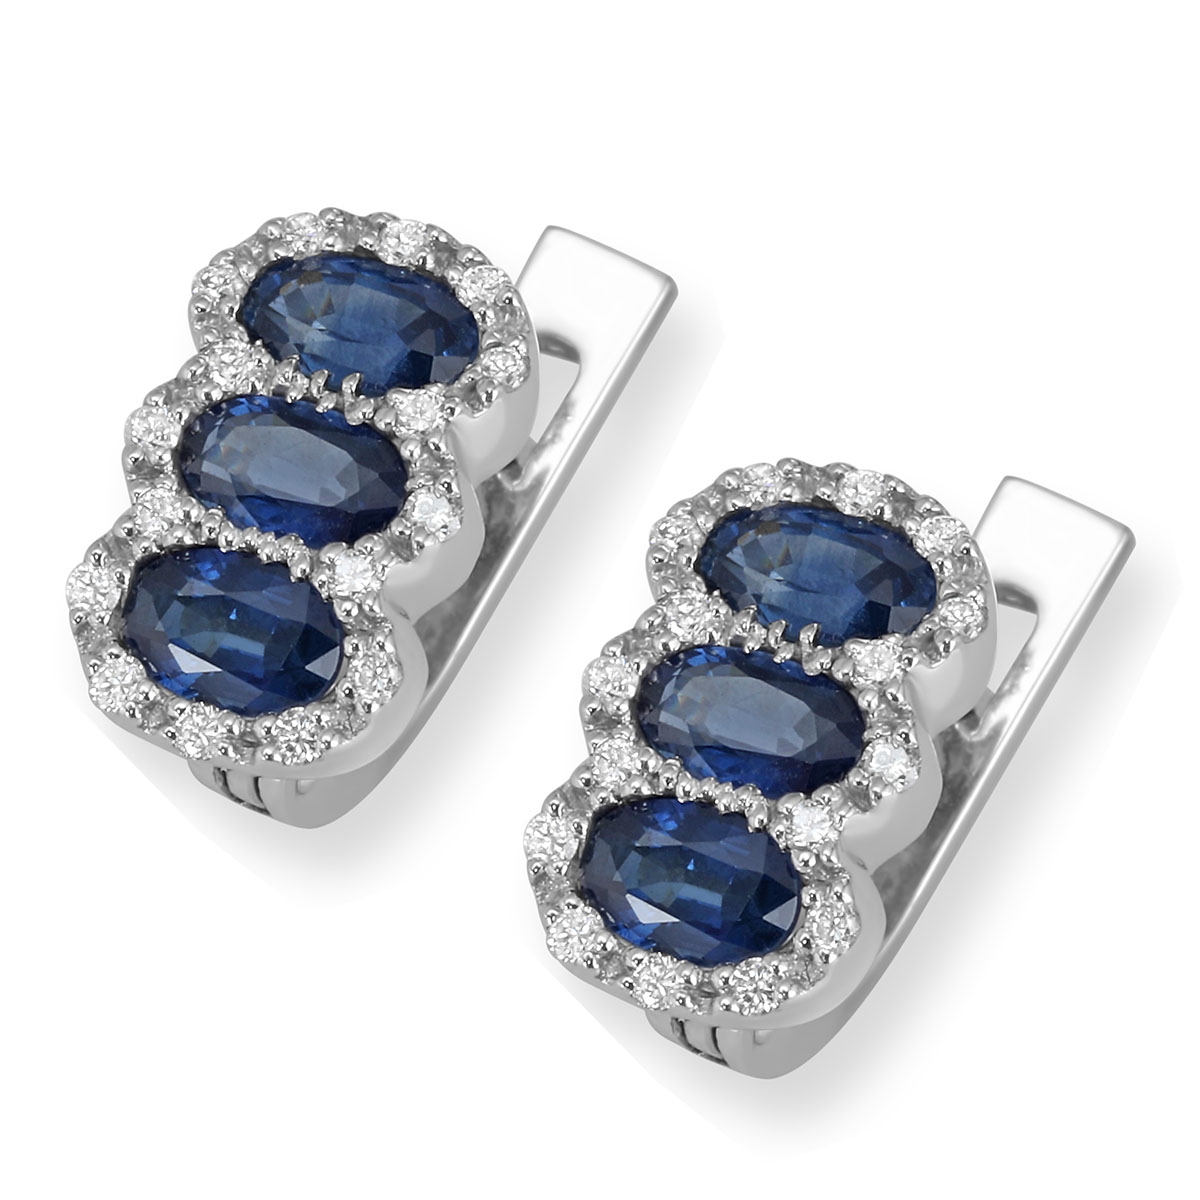 Anbinder 14K White Gold, Diamond, and Sapphire Vertical Cluster Earrings - 1